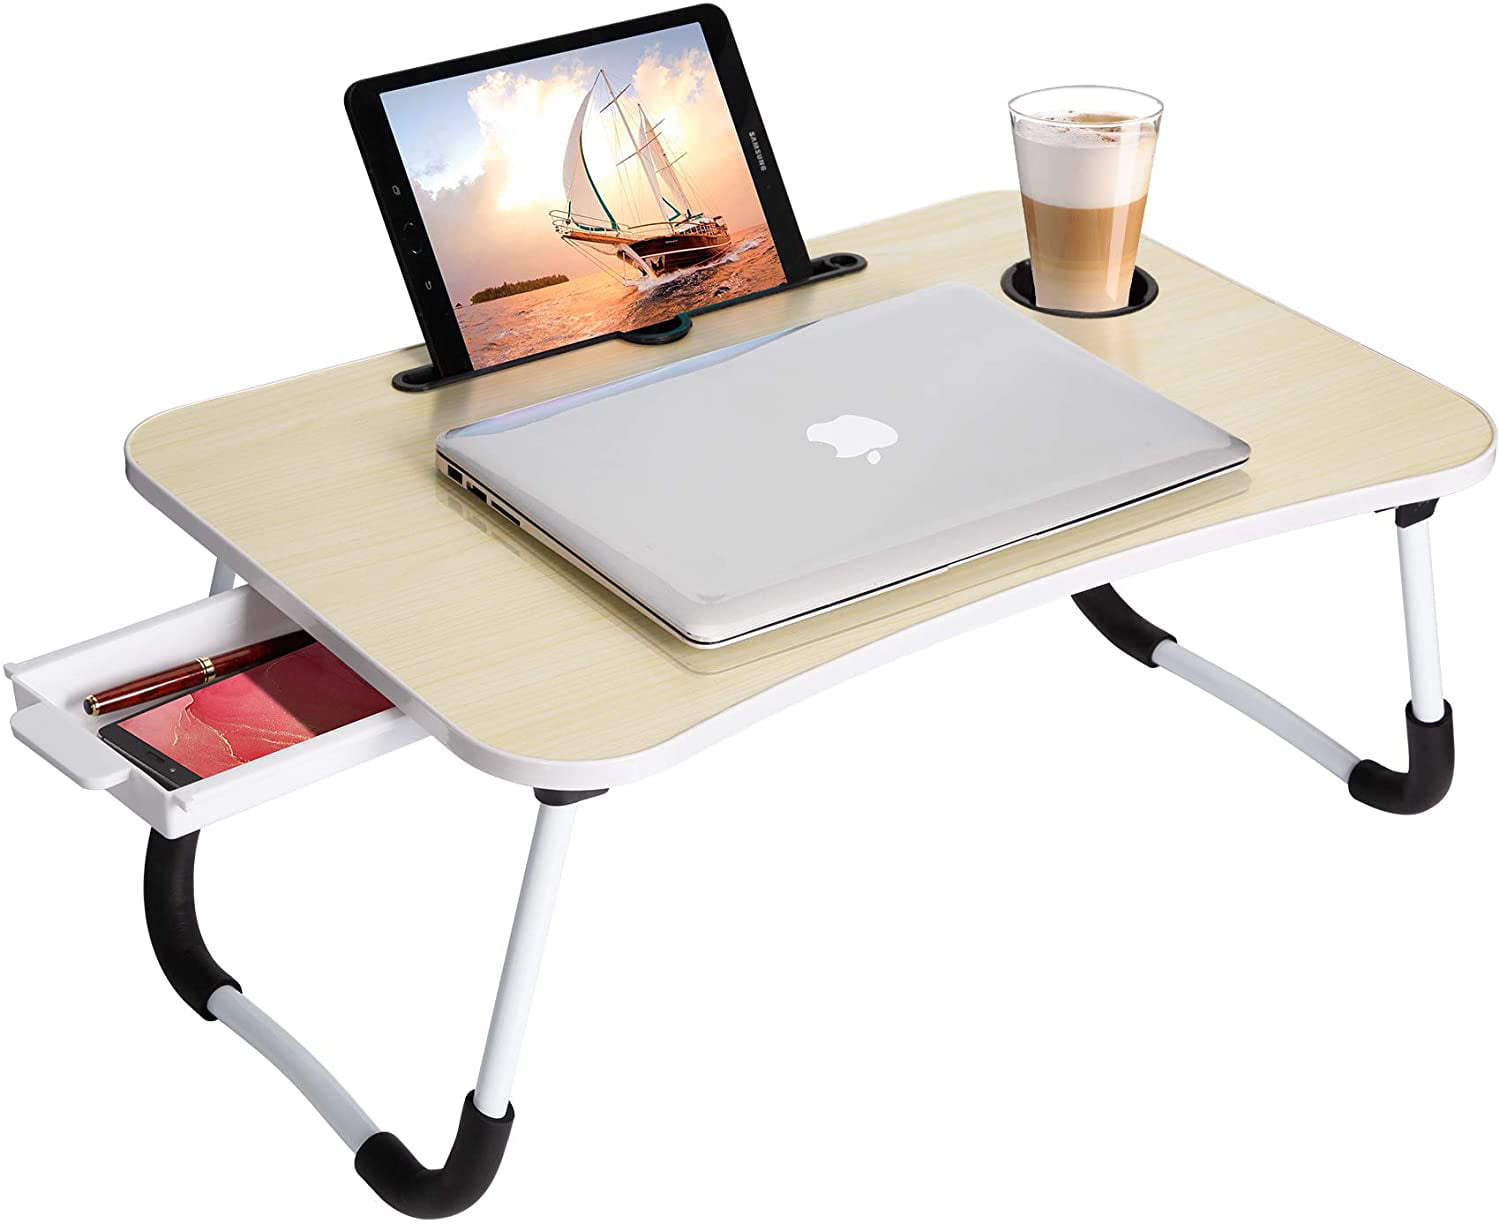 Portable Folding Laptop Desk for Bed Notebook Writing Table Stand Tray with Slot 